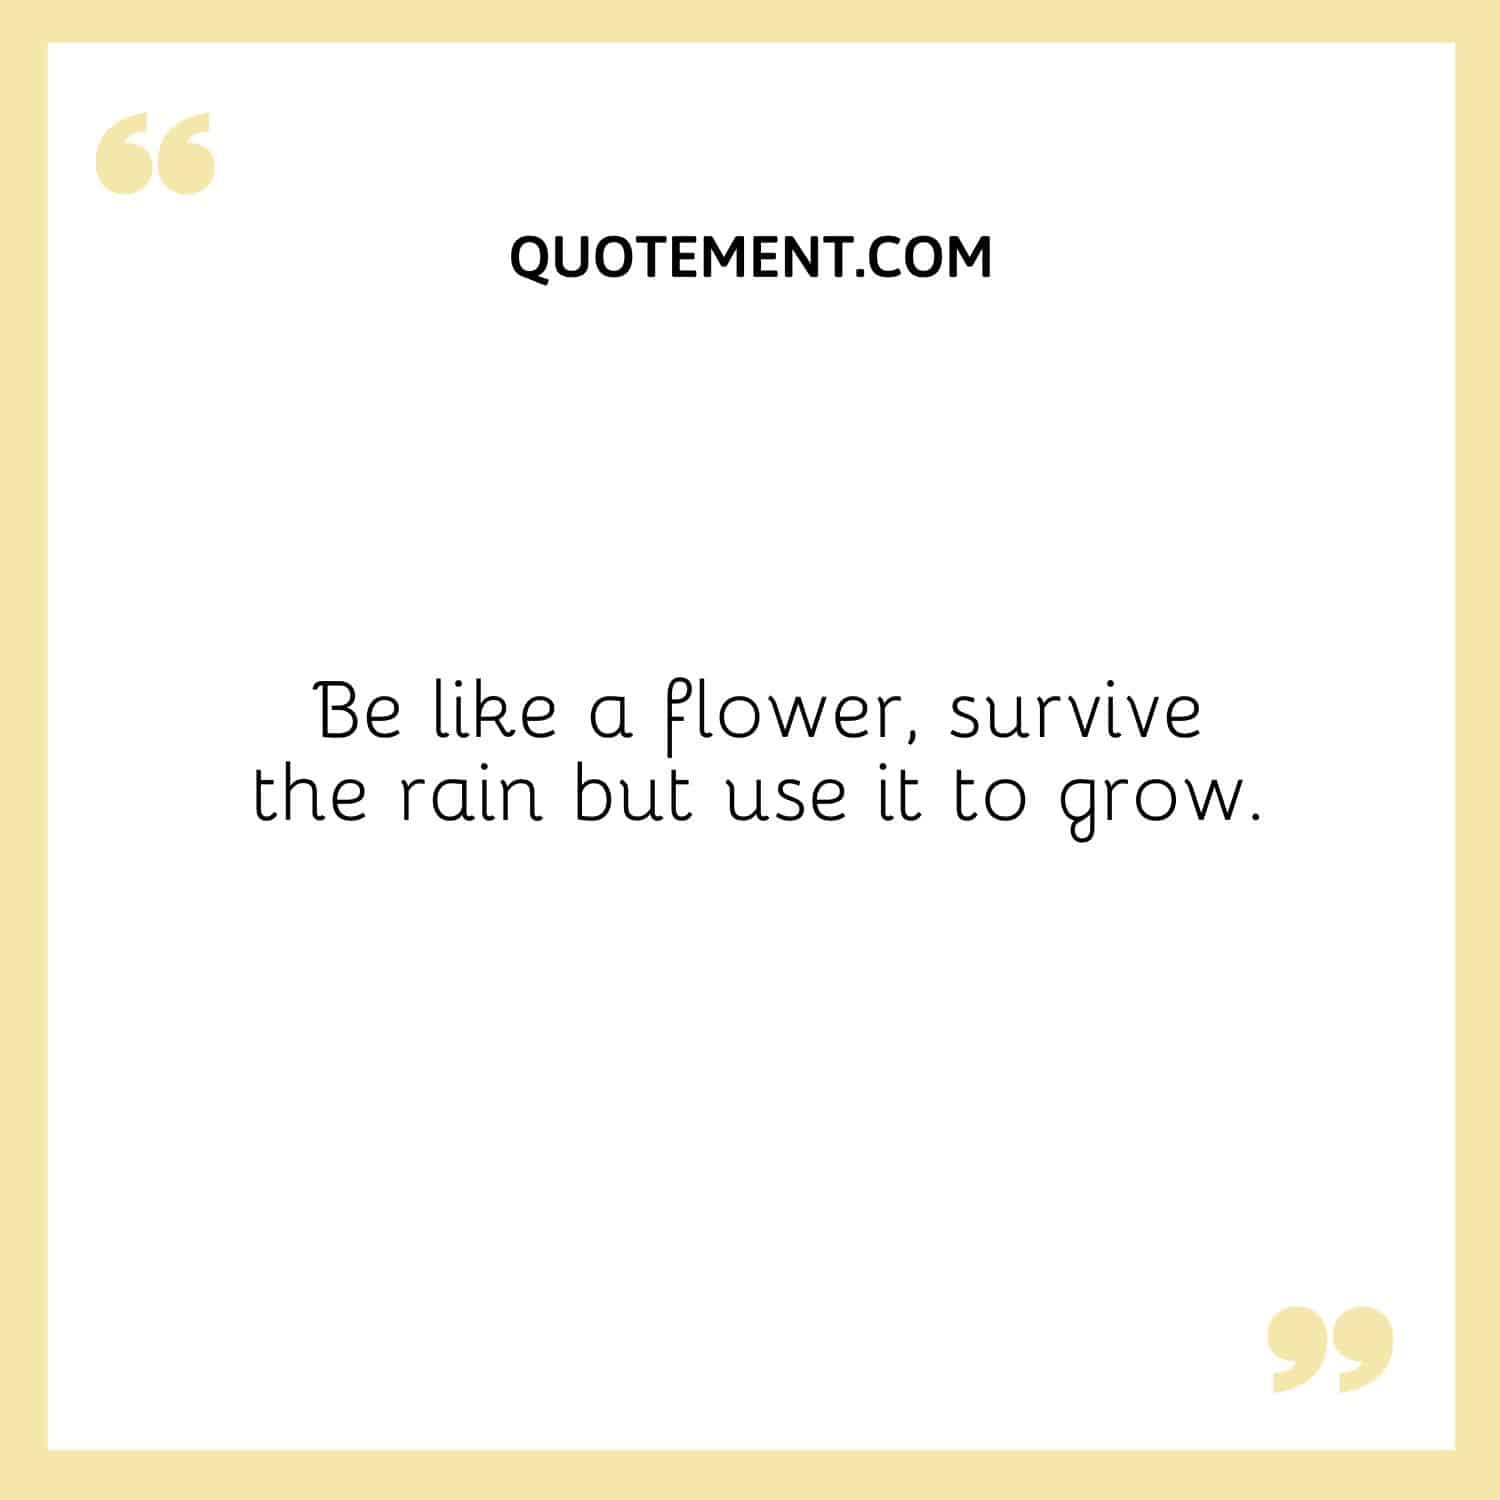 Be like a flower, survive the rain but use it to grow